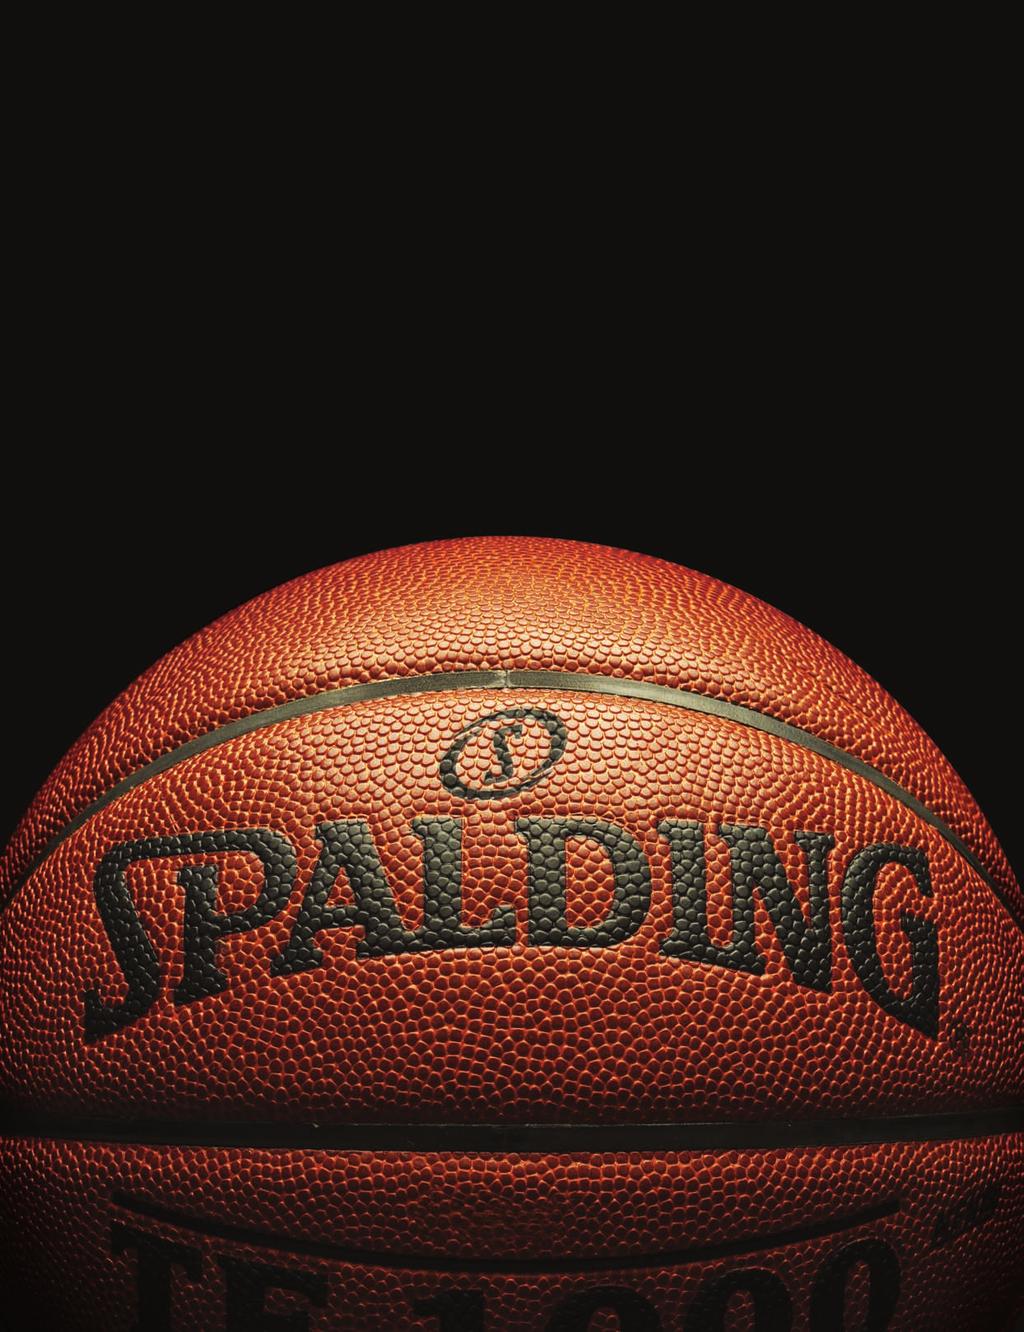 Spalding is in the game for keeps.